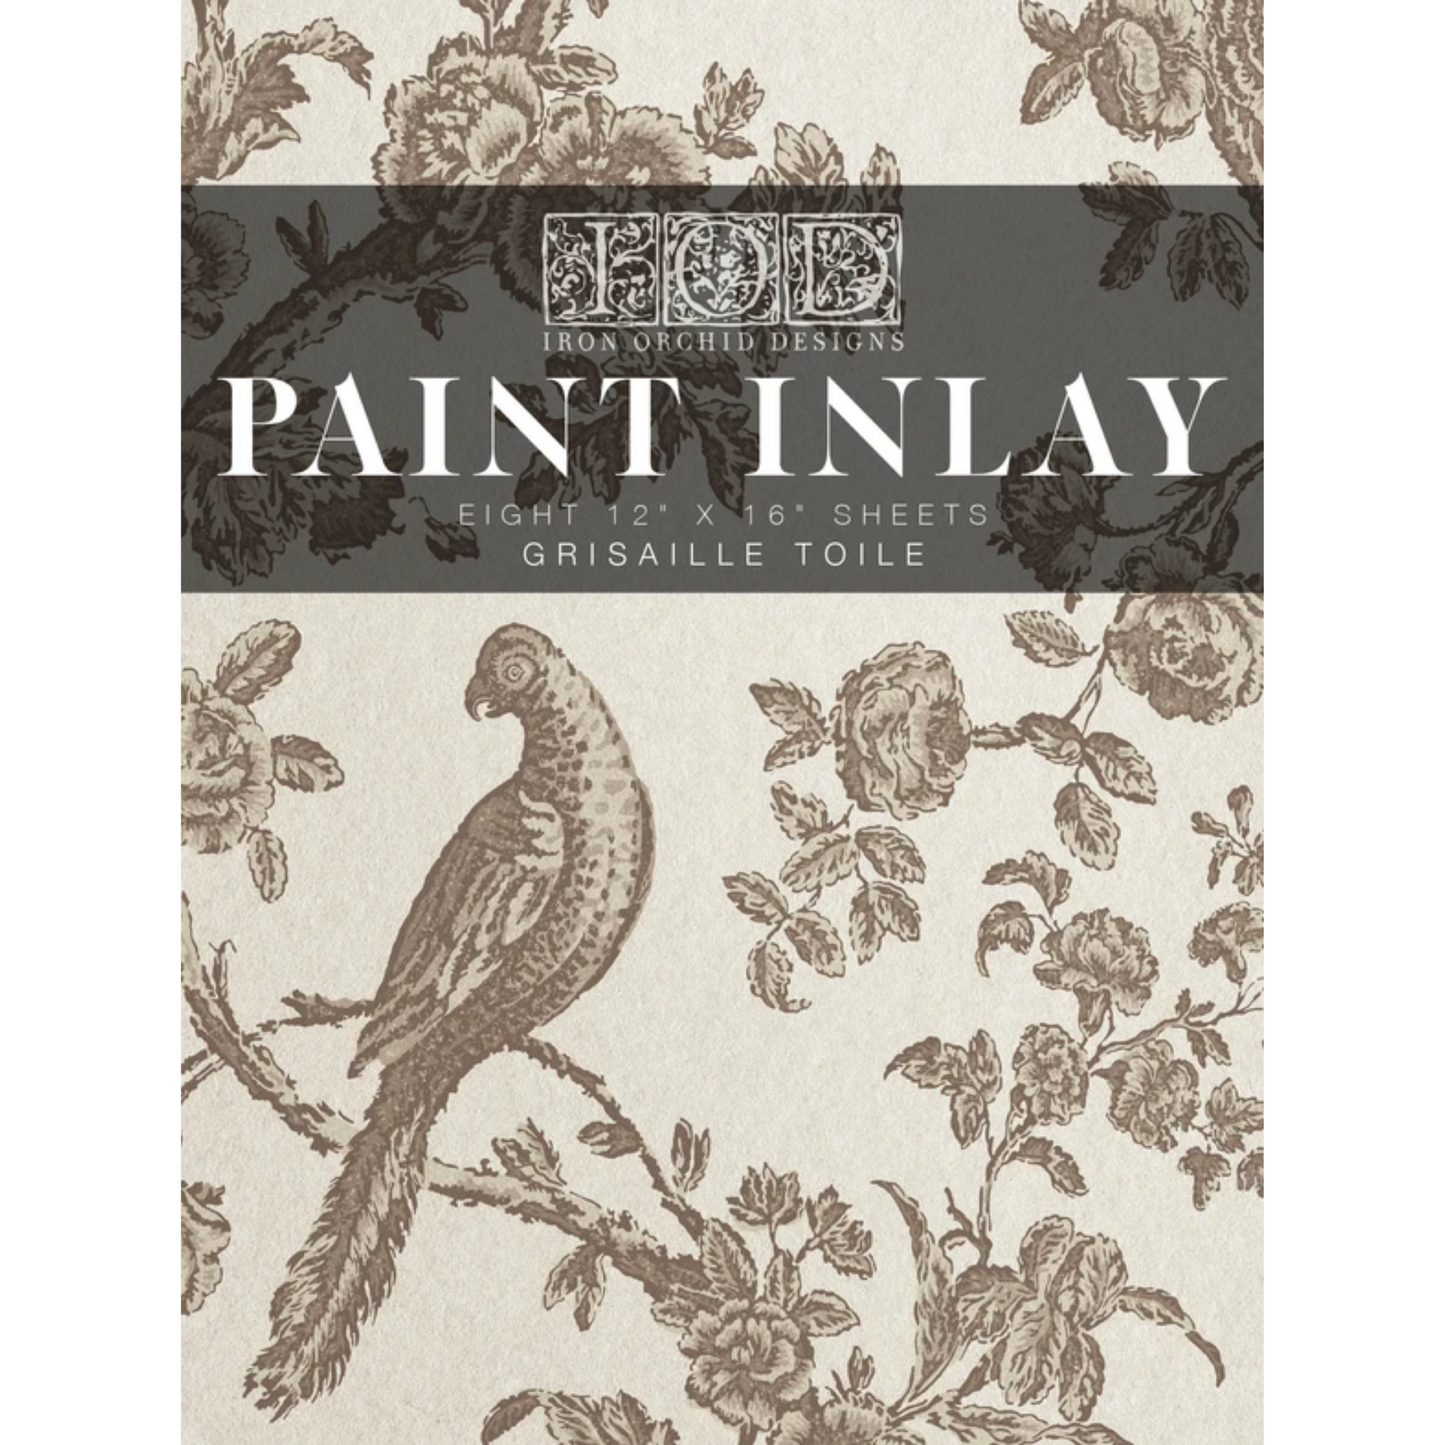 Grisaille Toile IOD Paint Inlay by Iron Orchid Designs available at Milton's Daughter.  Cover sheet. Includes eight 12" x 16" sheets.